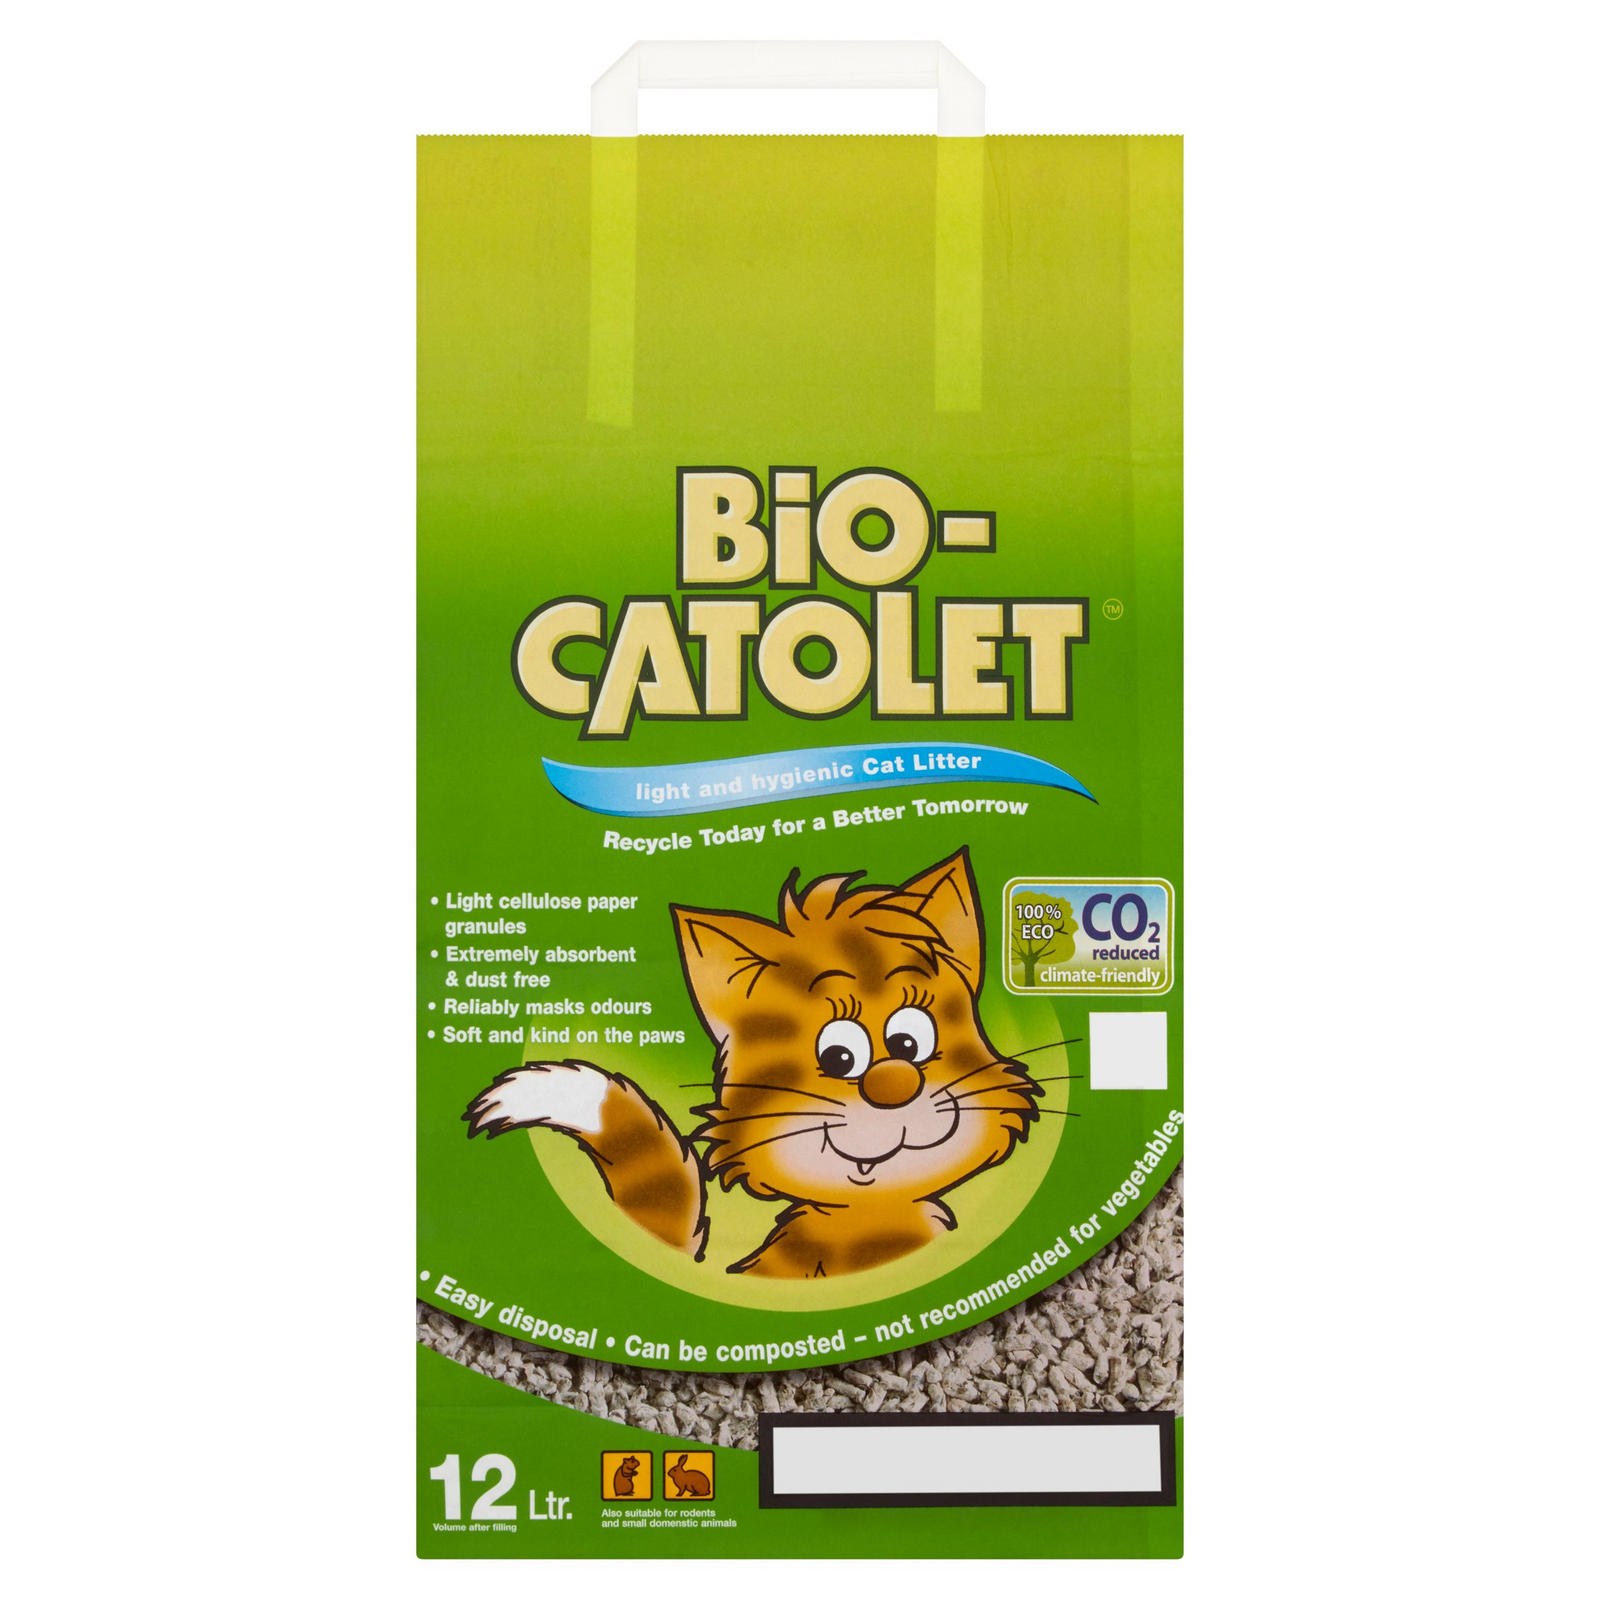 BioCatolet Light and Hygienic Cat Litter 12 Ltr Pet Food Iceland Foods